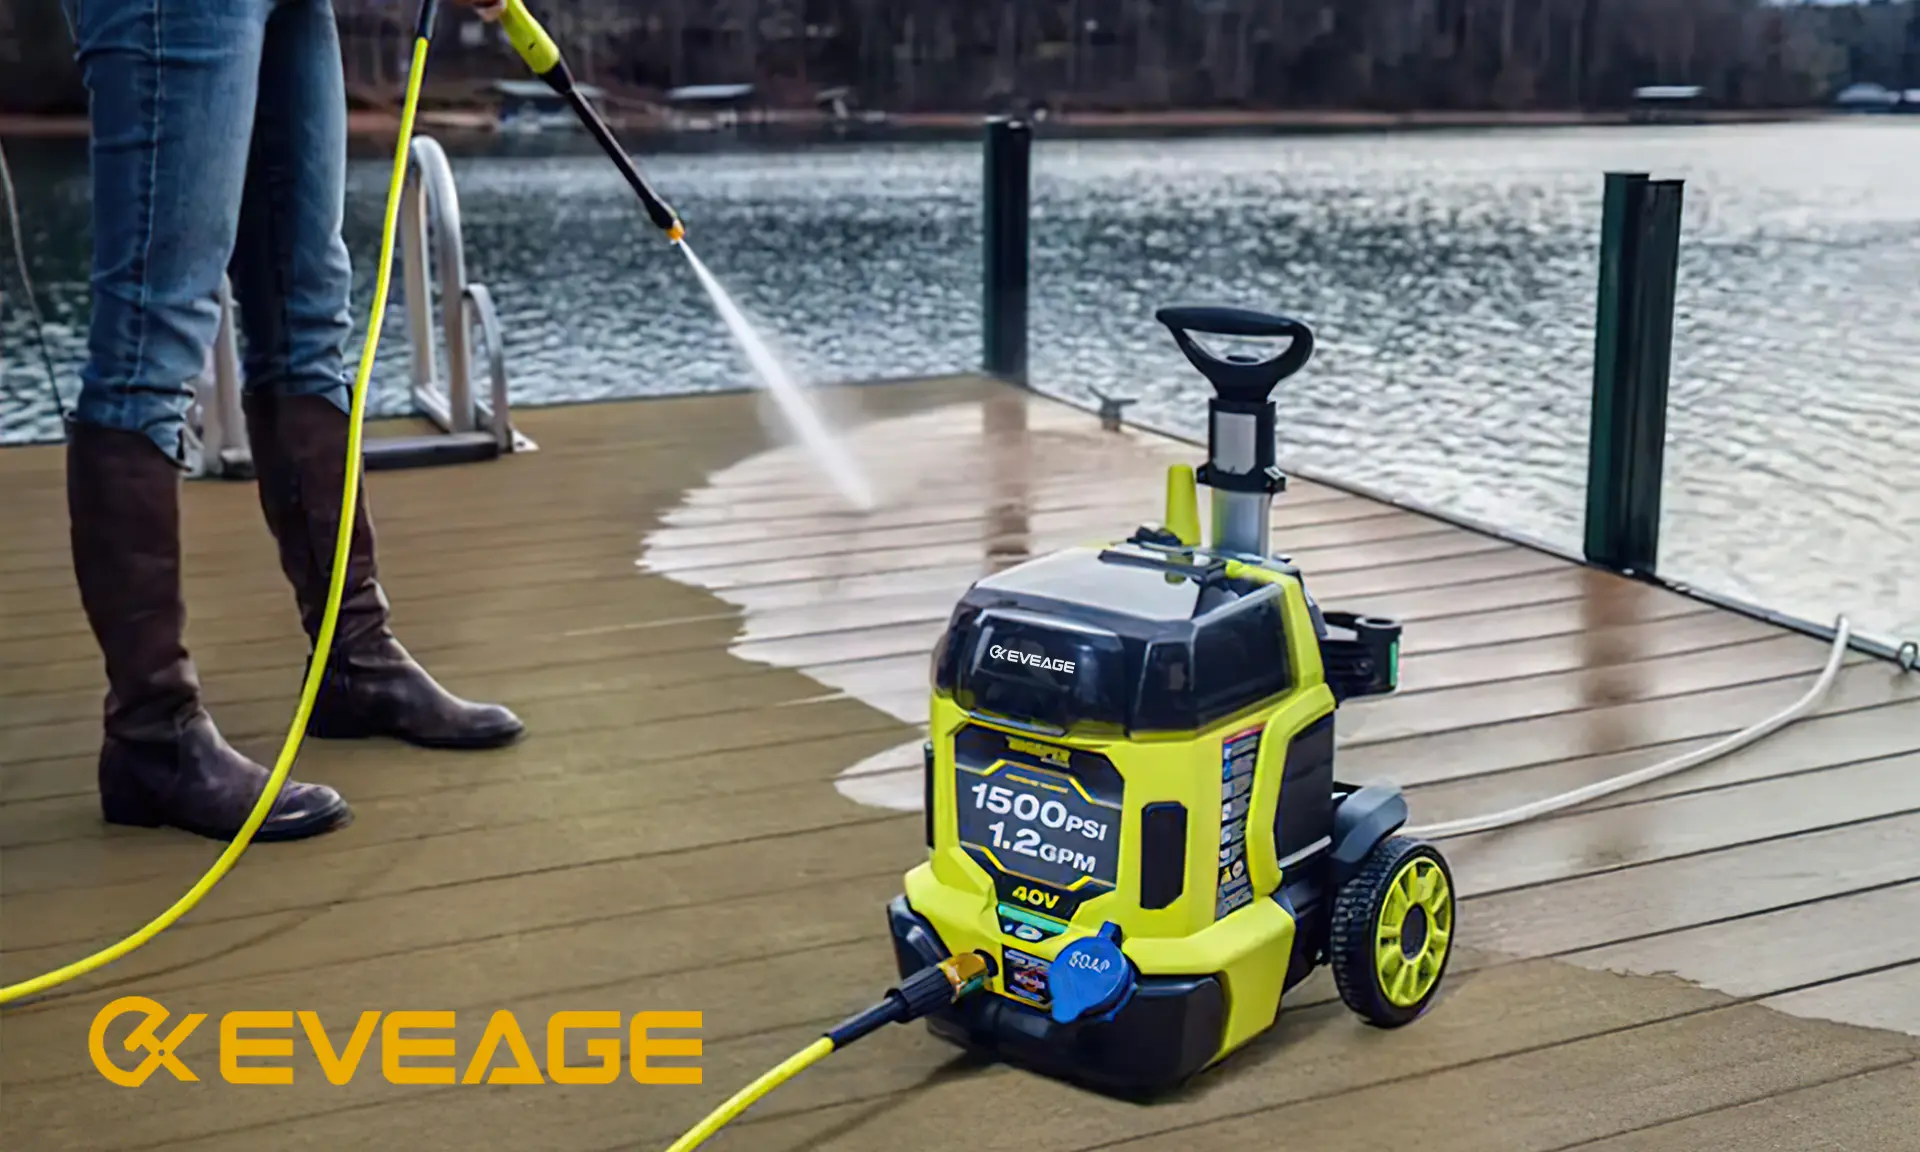 Are electric pressure washers any good